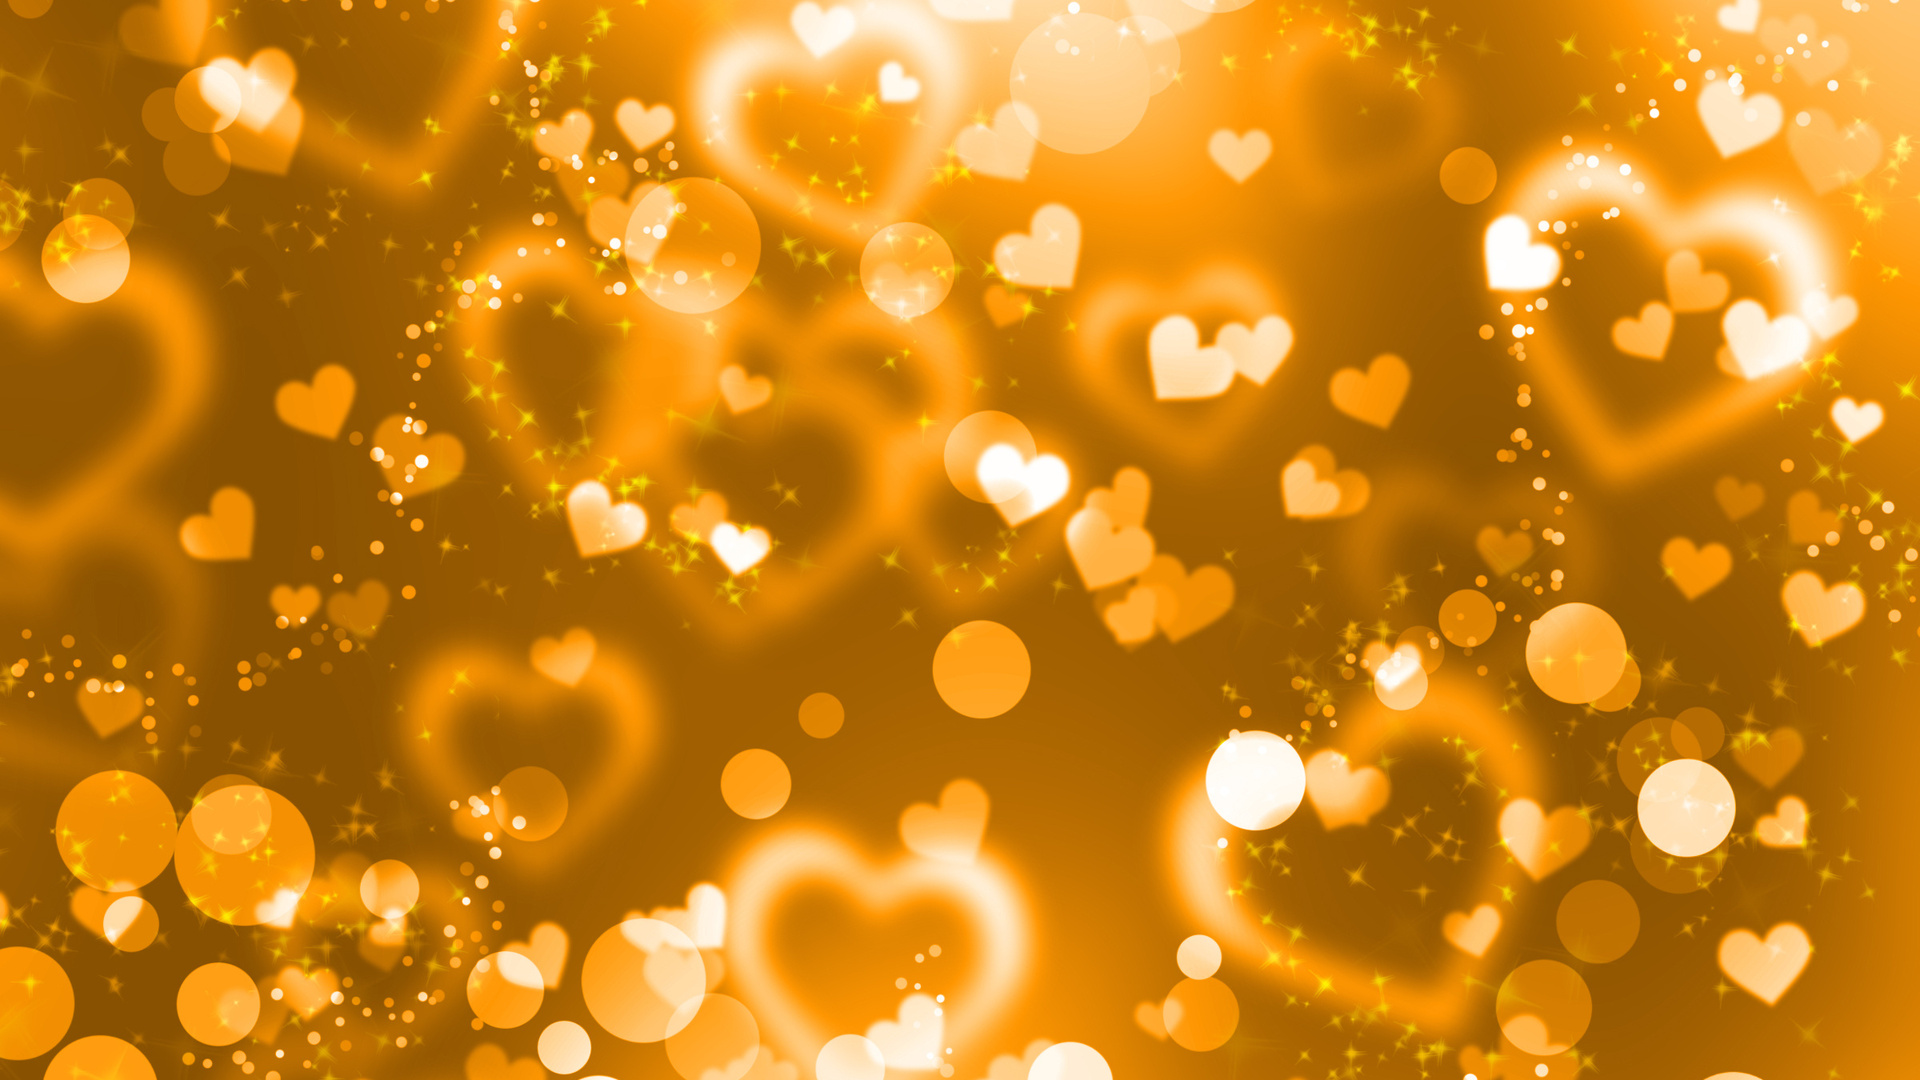 Free download Solid Gold Background wallpaper Solid Gold Background HD wallpaper [1920x1080] for your Desktop, Mobile & Tablet. Explore Gold Hearts Wallpaper. Heart Background Wallpaper, Heart Wallpaper, Cute Heart Wallpaper